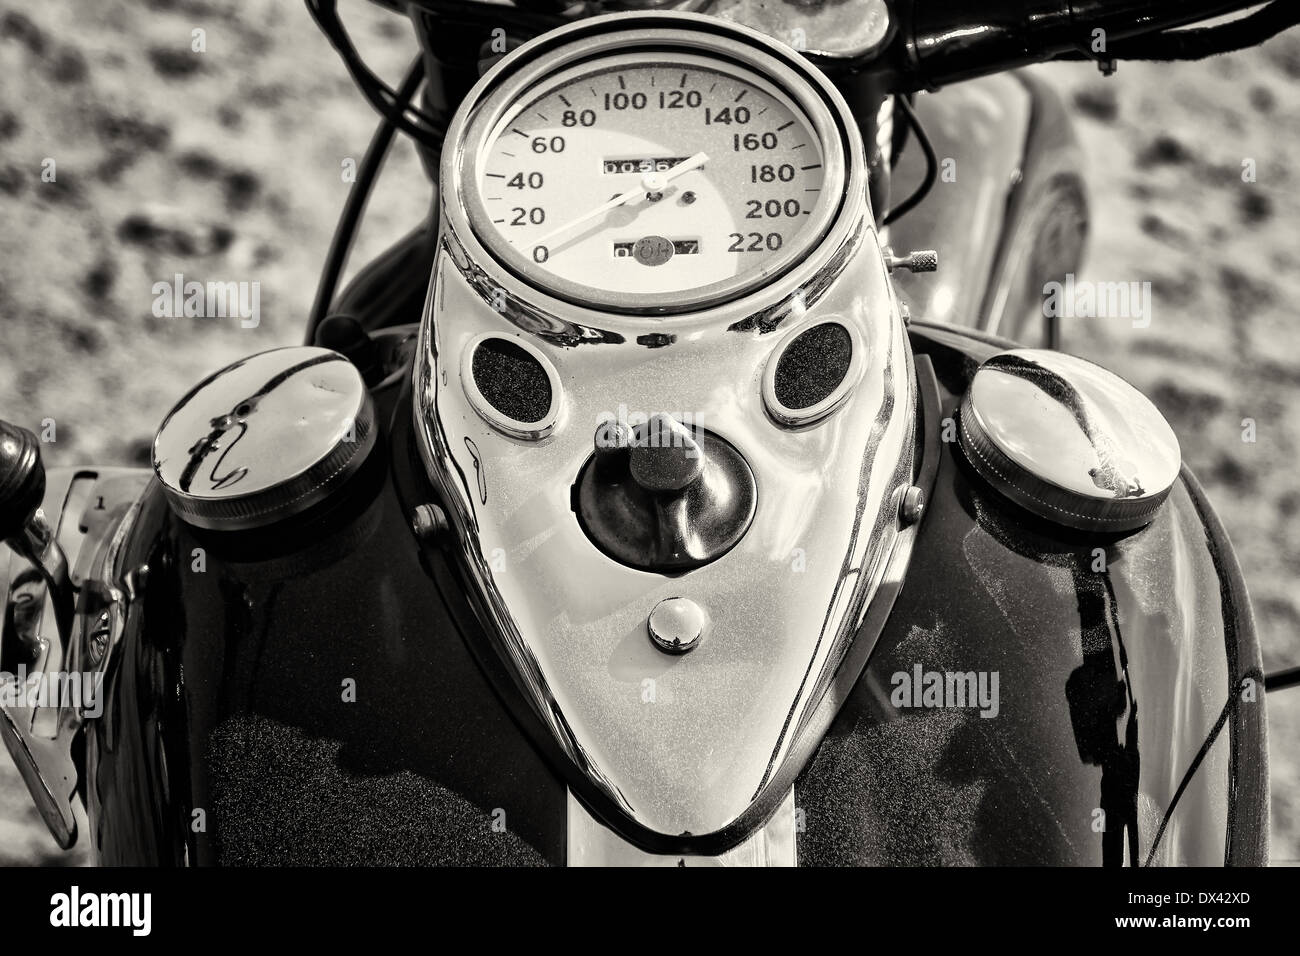 The dashboard and fuel tank motorcycle Harley Davidson, black and white Stock Photo